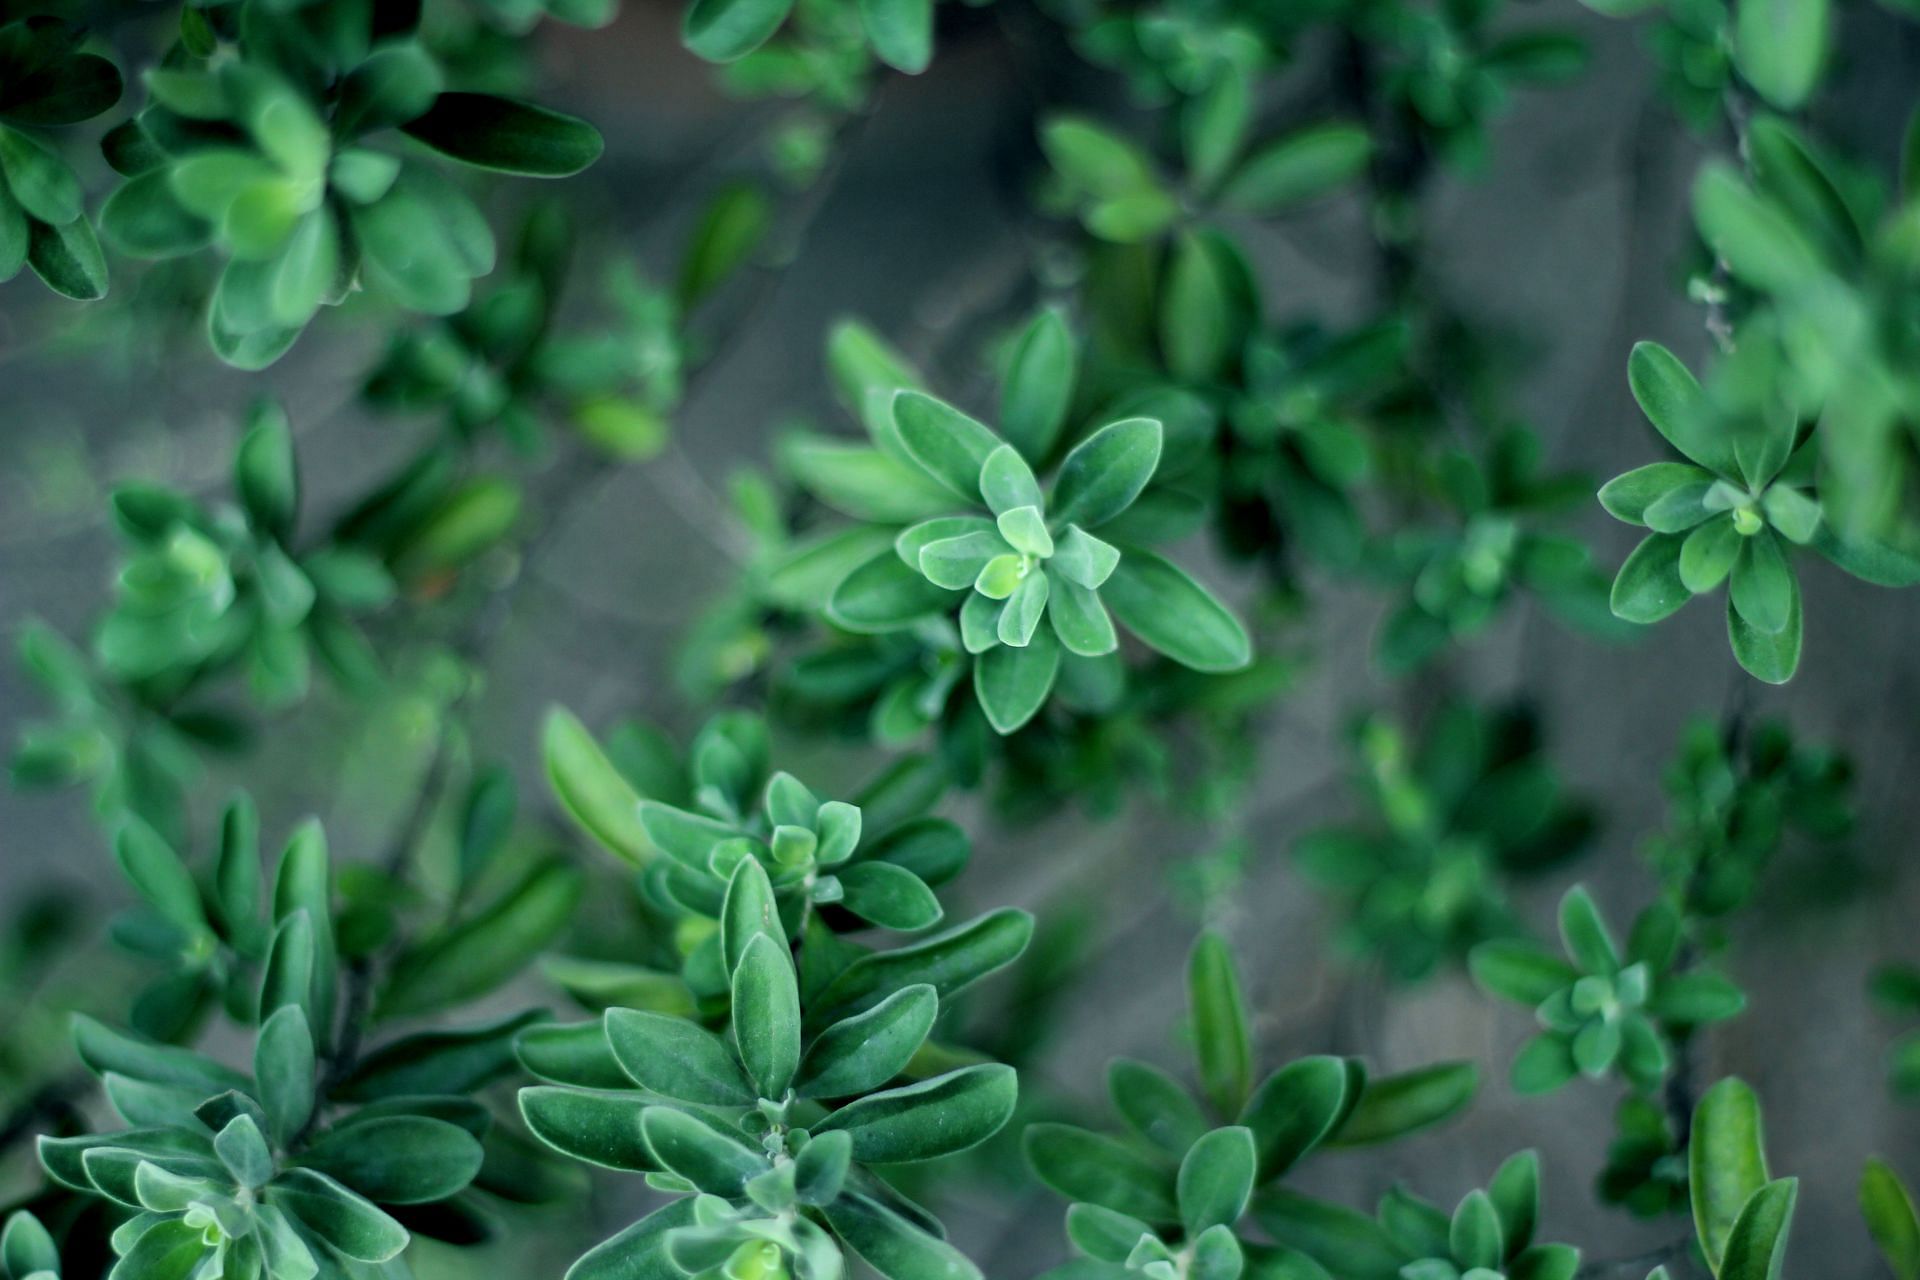 Thyme has been used in anti-cough and cold remedies since ages (Image via Unsplash @Albert Melu)